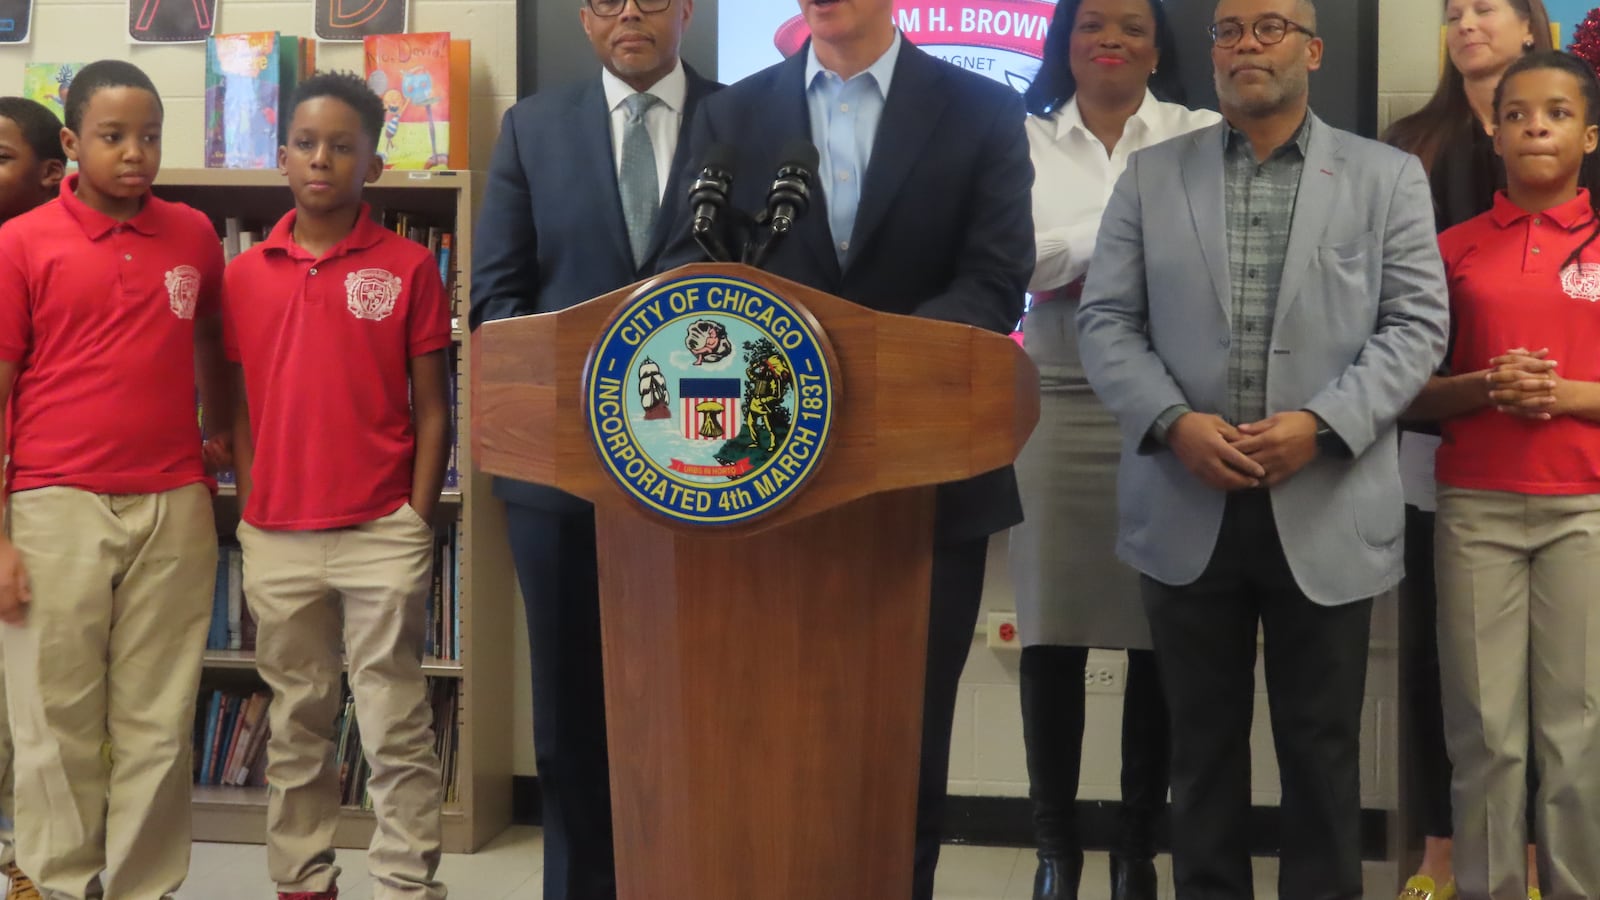 Schools chief Janice Jackson joined Mayor Rahm Emanuel and other city officials at the William H. Brown School of Technology on the Near West Side in announcing the program.